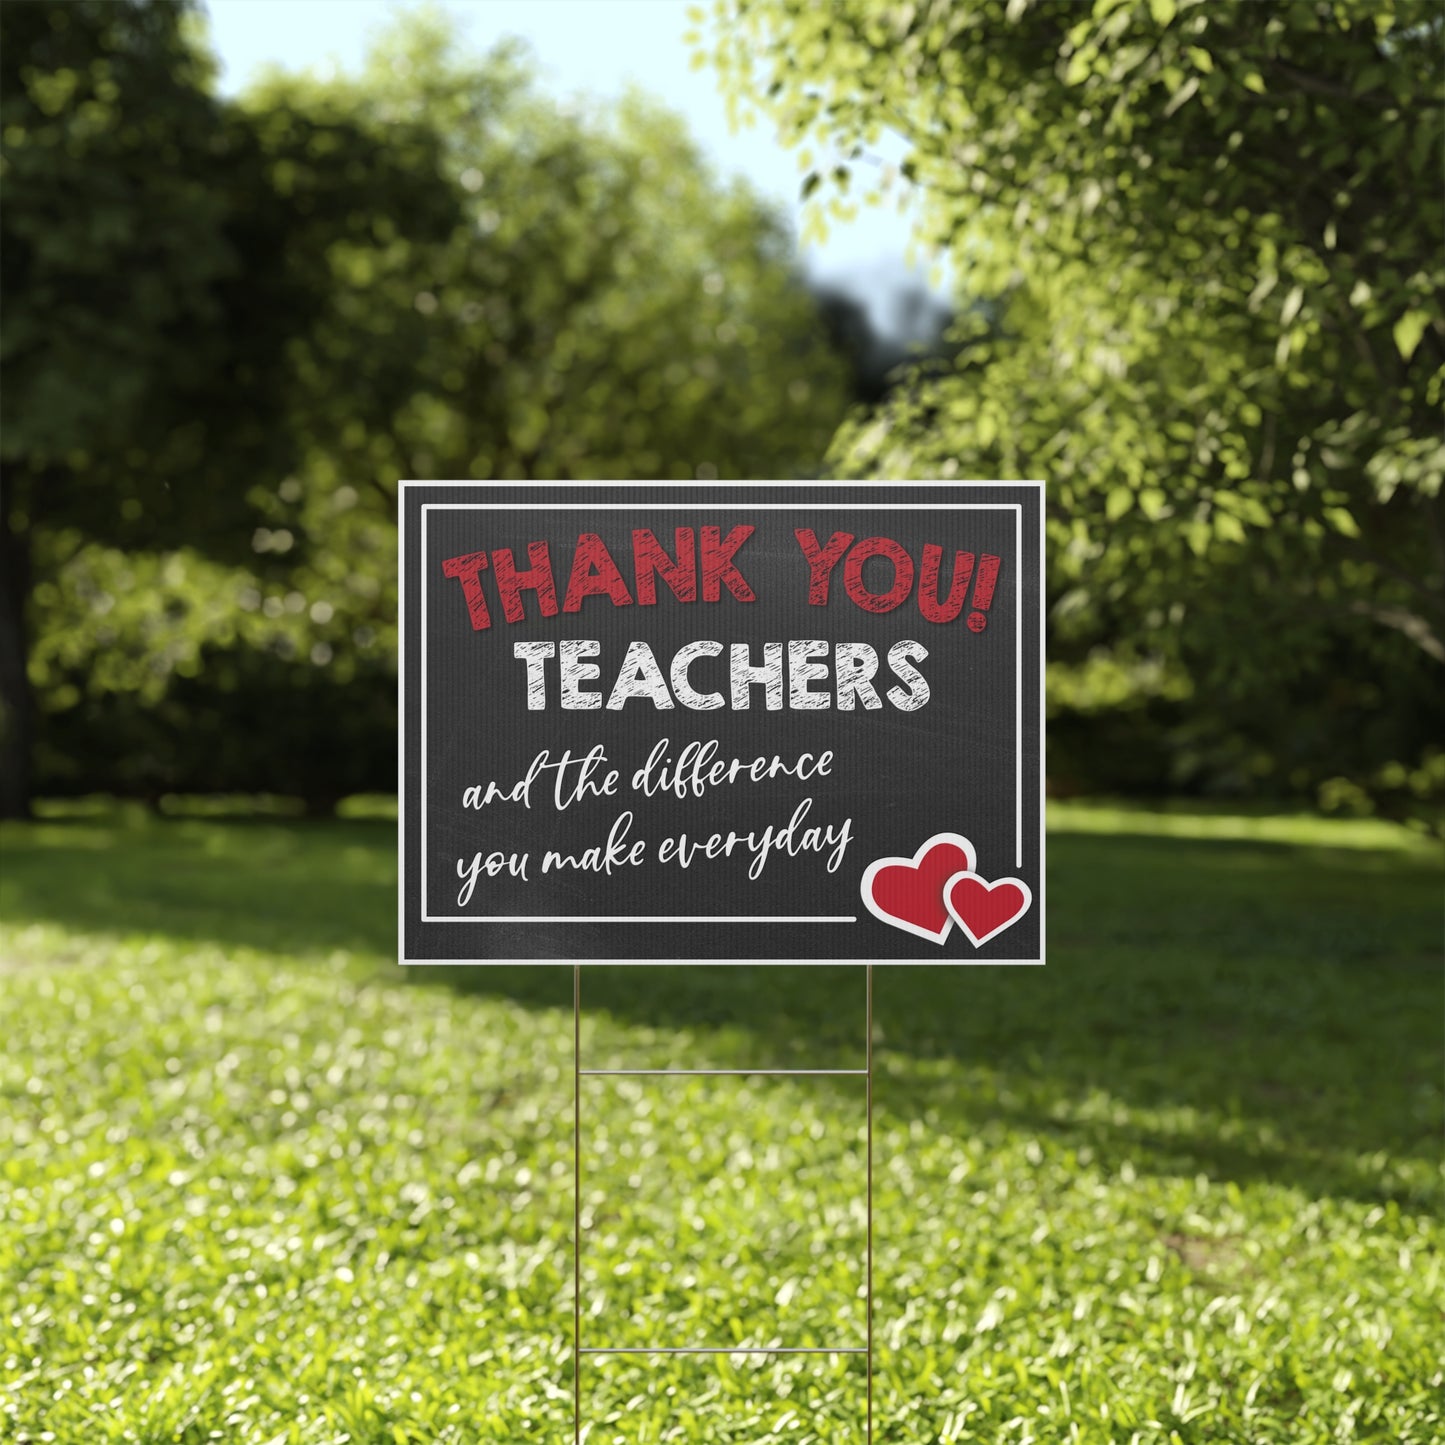 Thank You Teachers, The Difference You Make Everyday, Heart, Yard Sign, Printed 2-Sided -18 x 12,24x18 or 36x24, Metal H-Stake Included, v5